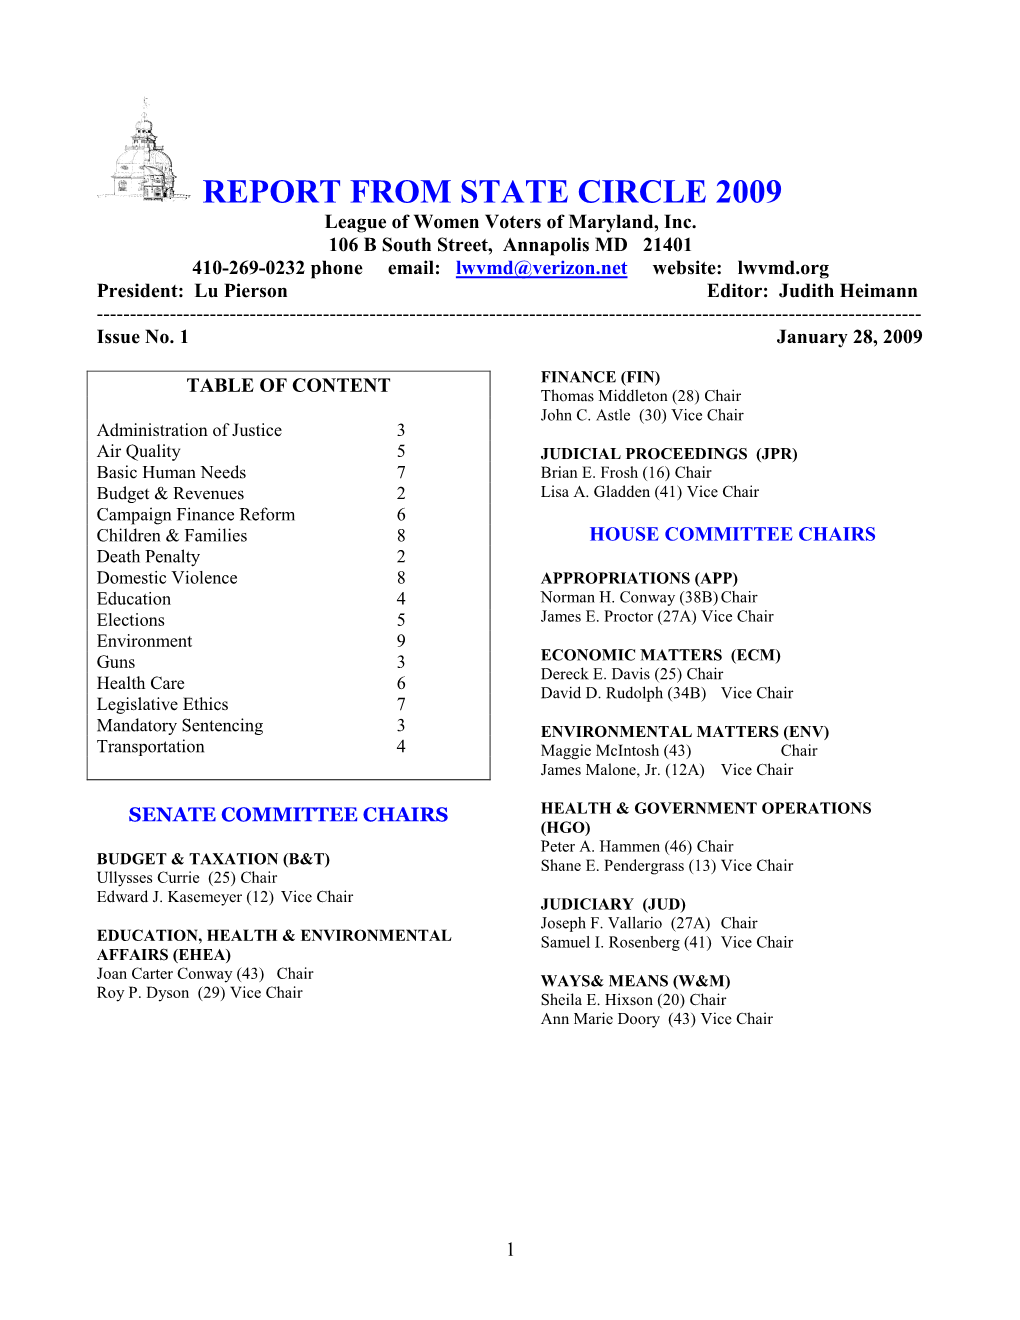 REPORT from STATE CIRCLE 2009 League of Women Voters of Maryland, Inc